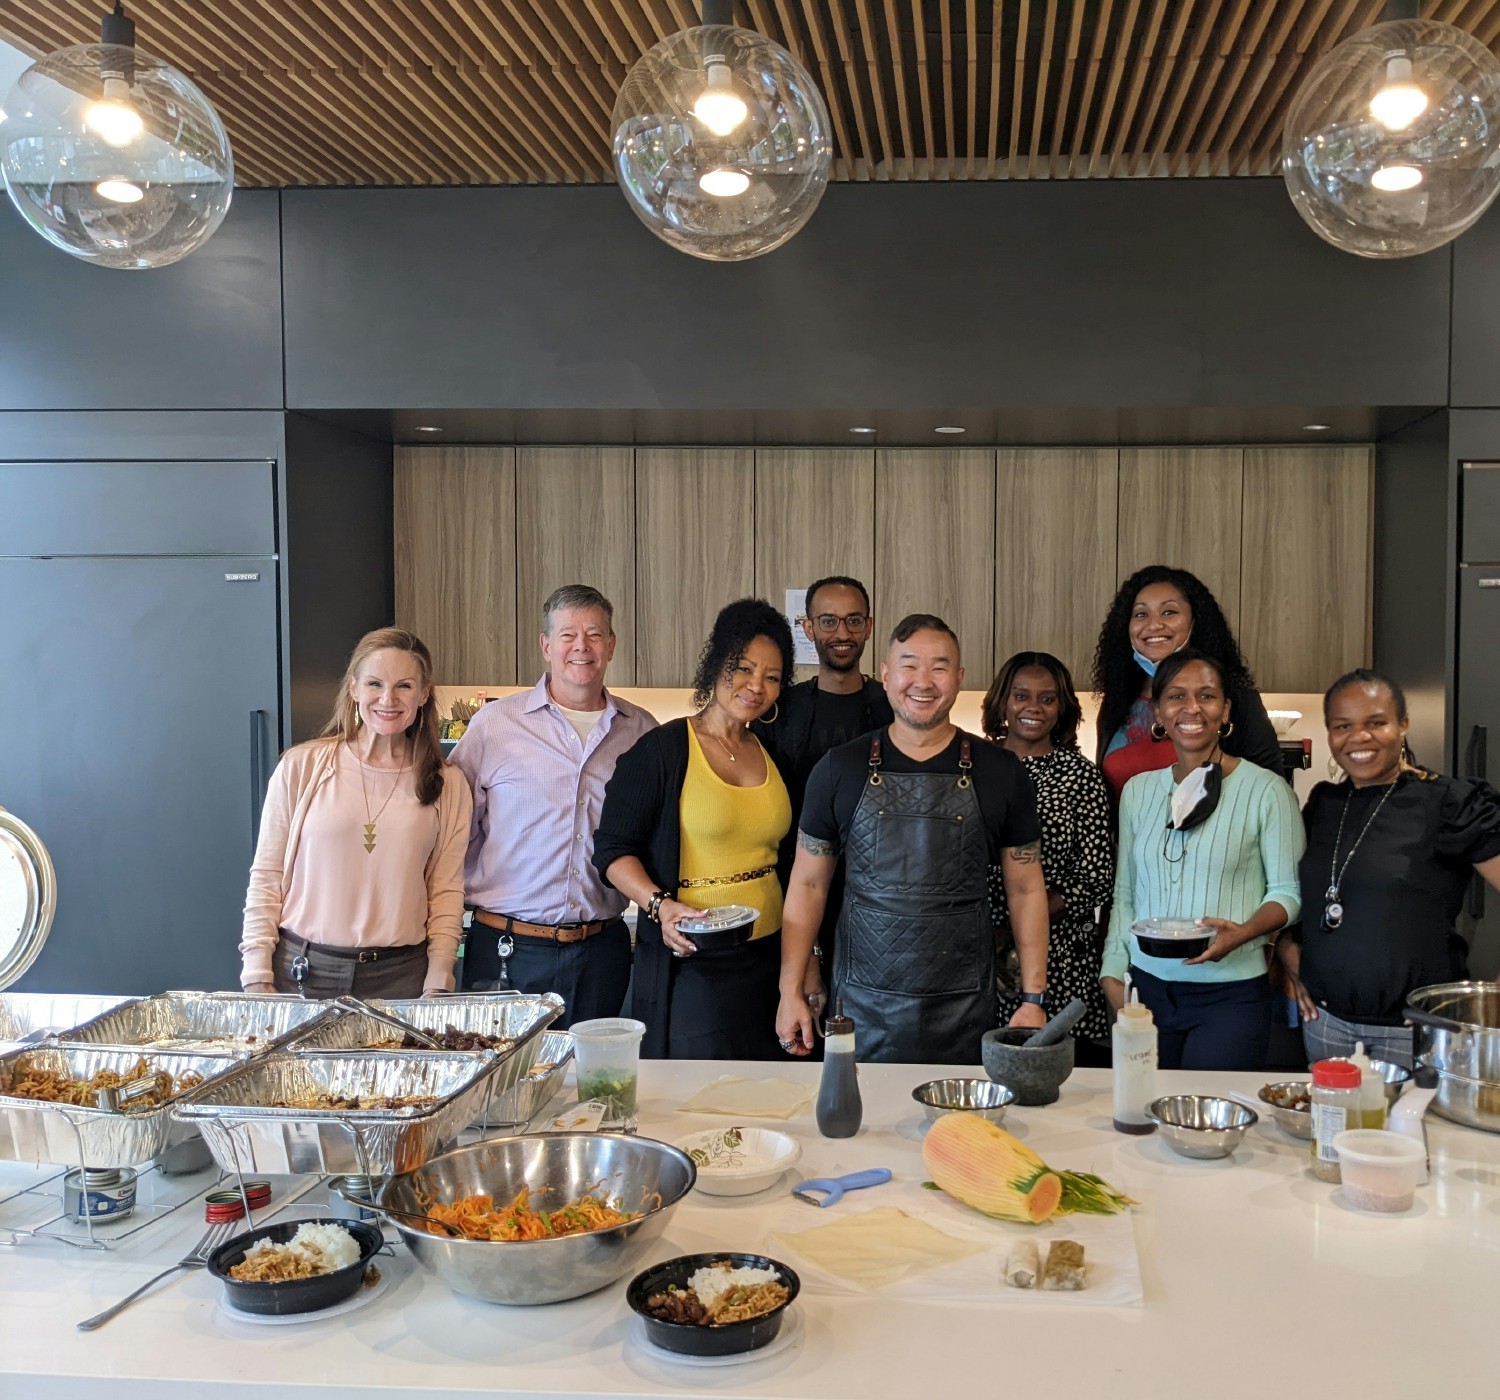 Columbia’s DEI Committee organized culturally immersive cooking classes for the team in honor of AAPI Heritage Month.